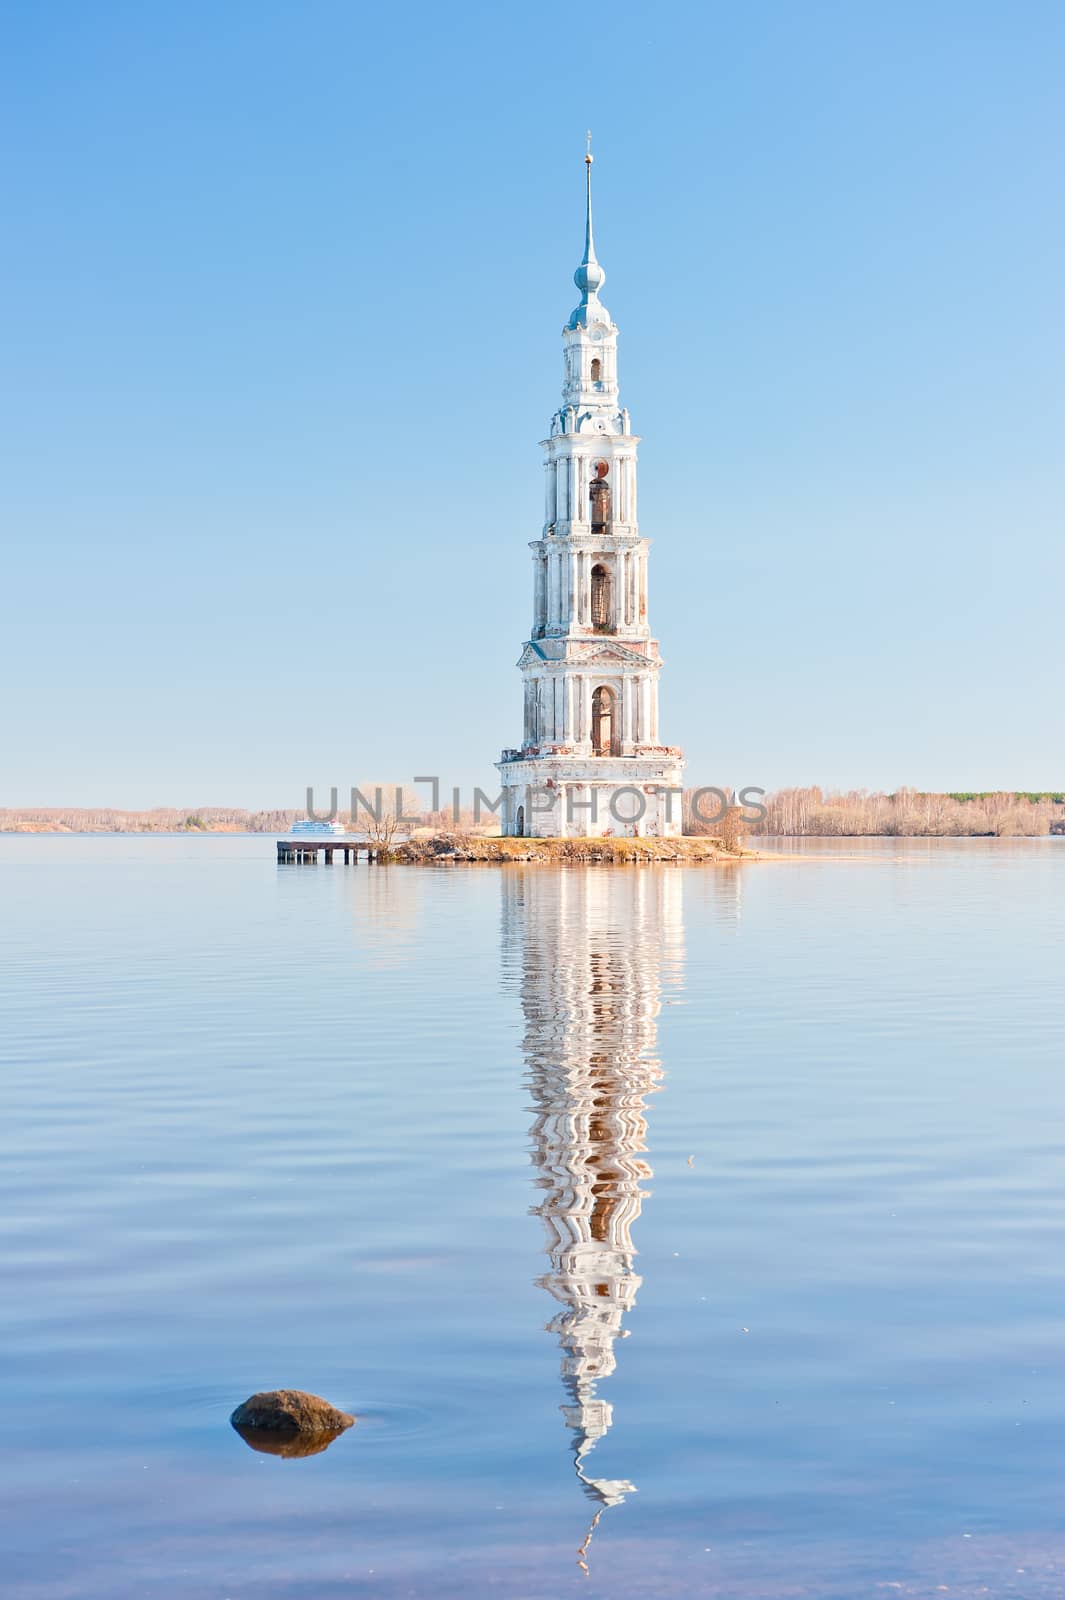 High belltower in the middle of the wide river